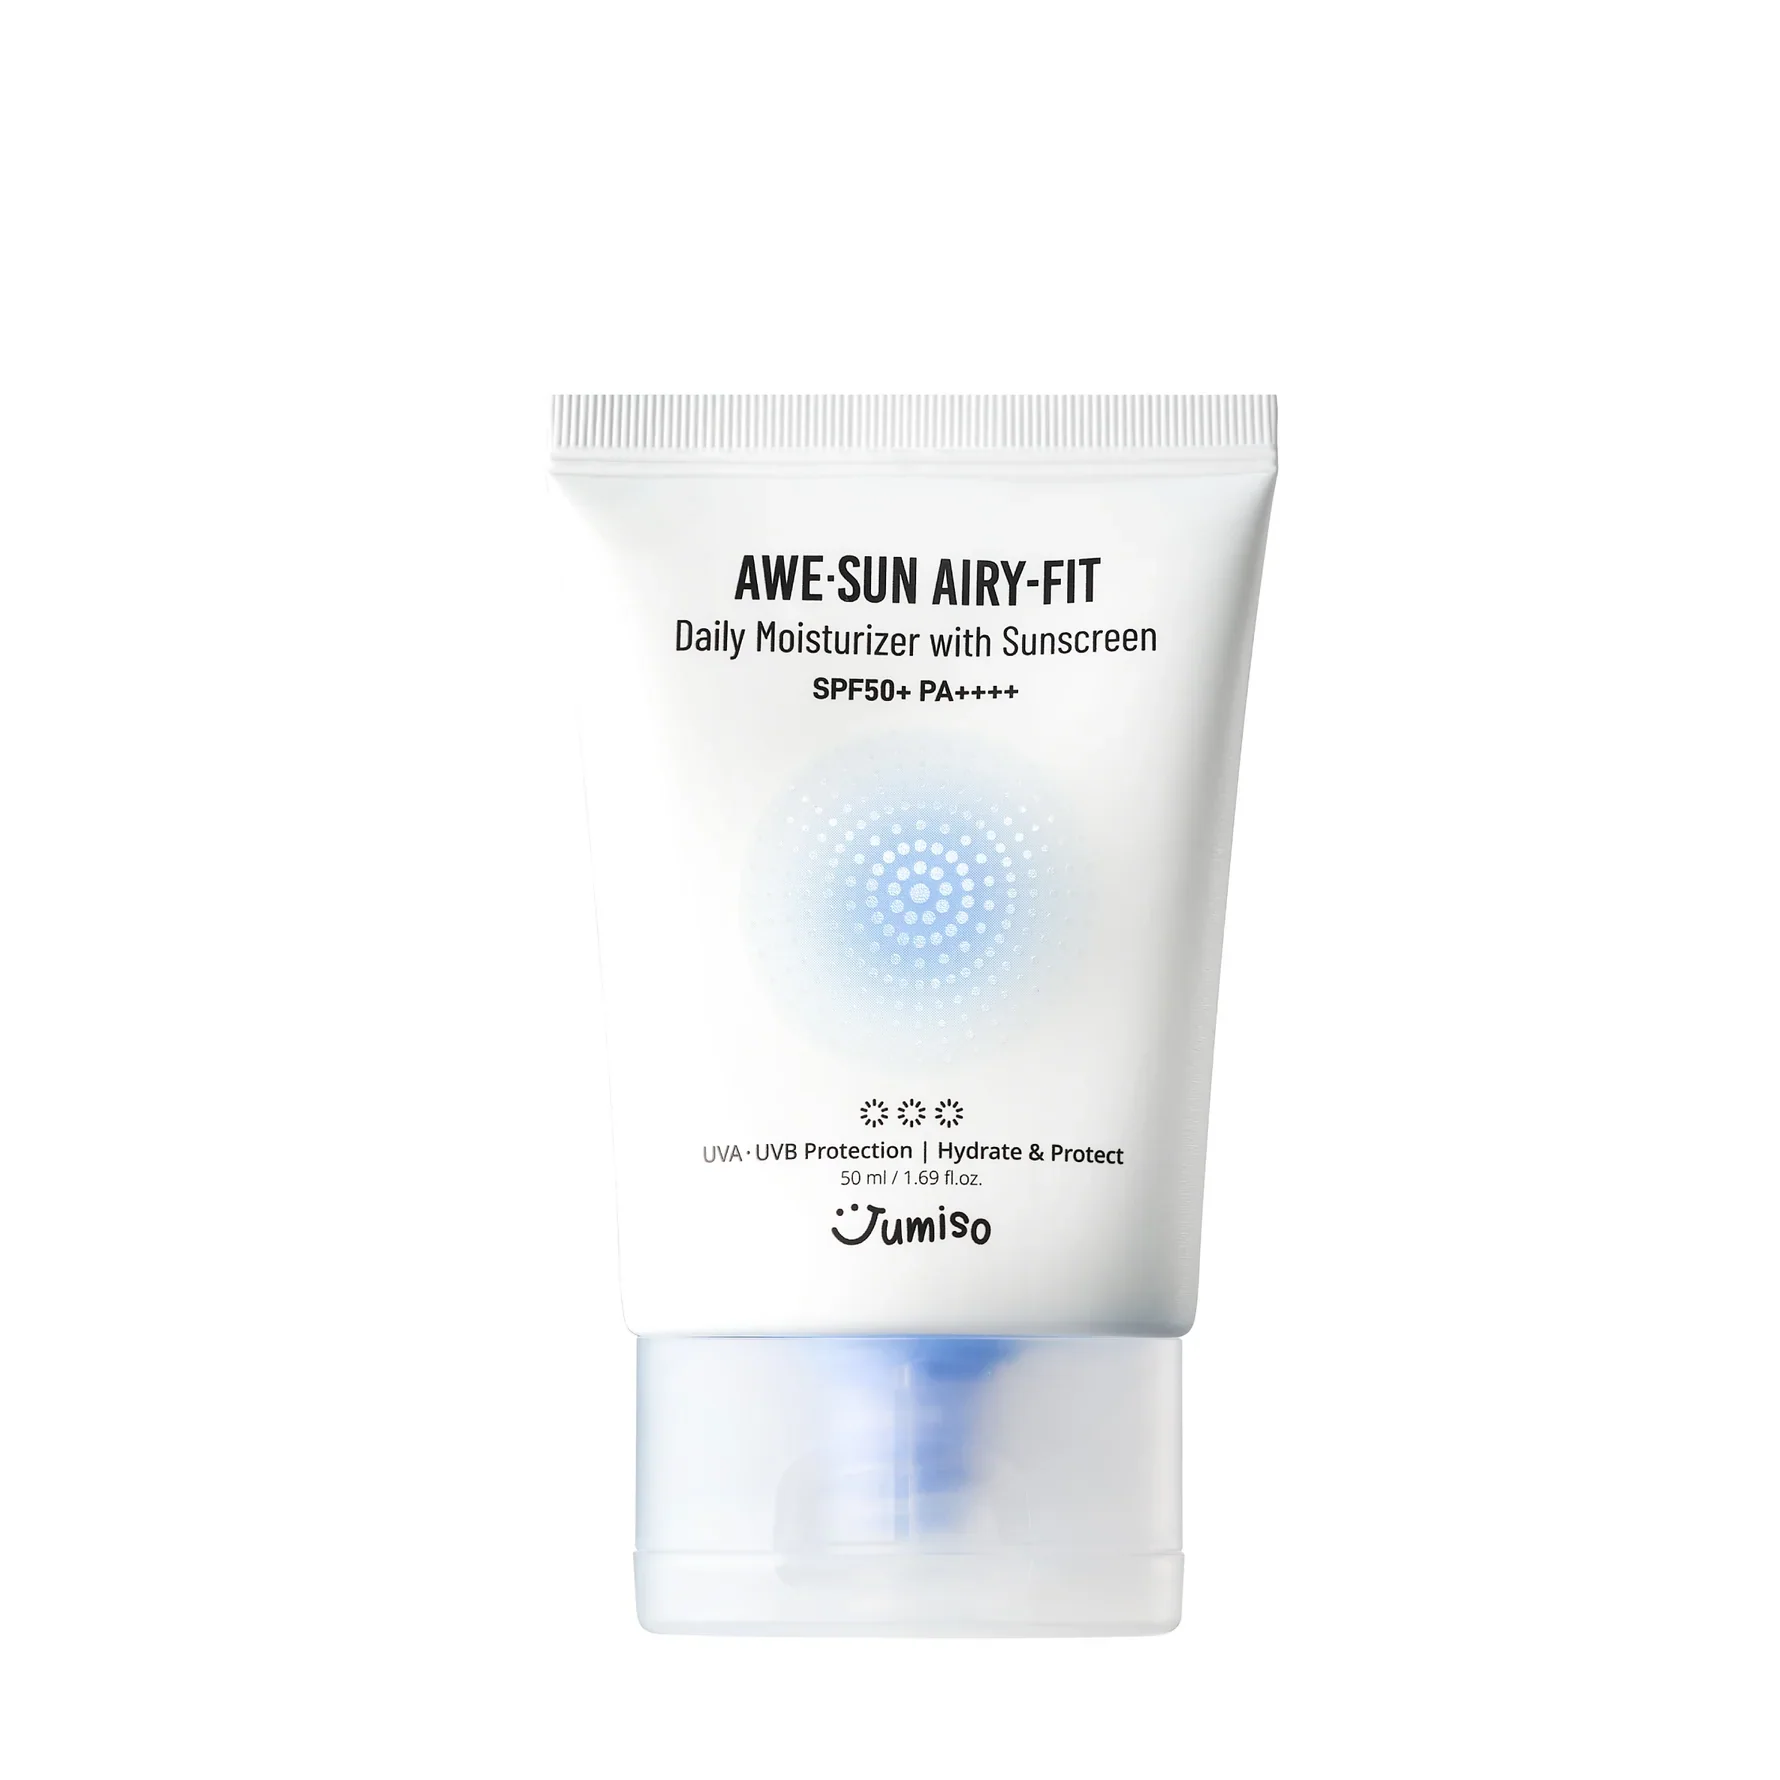 AWE⋅SUN Airy Fit Daily Moisturizer with Sunscreen SPF50+ PA++++ 50ml